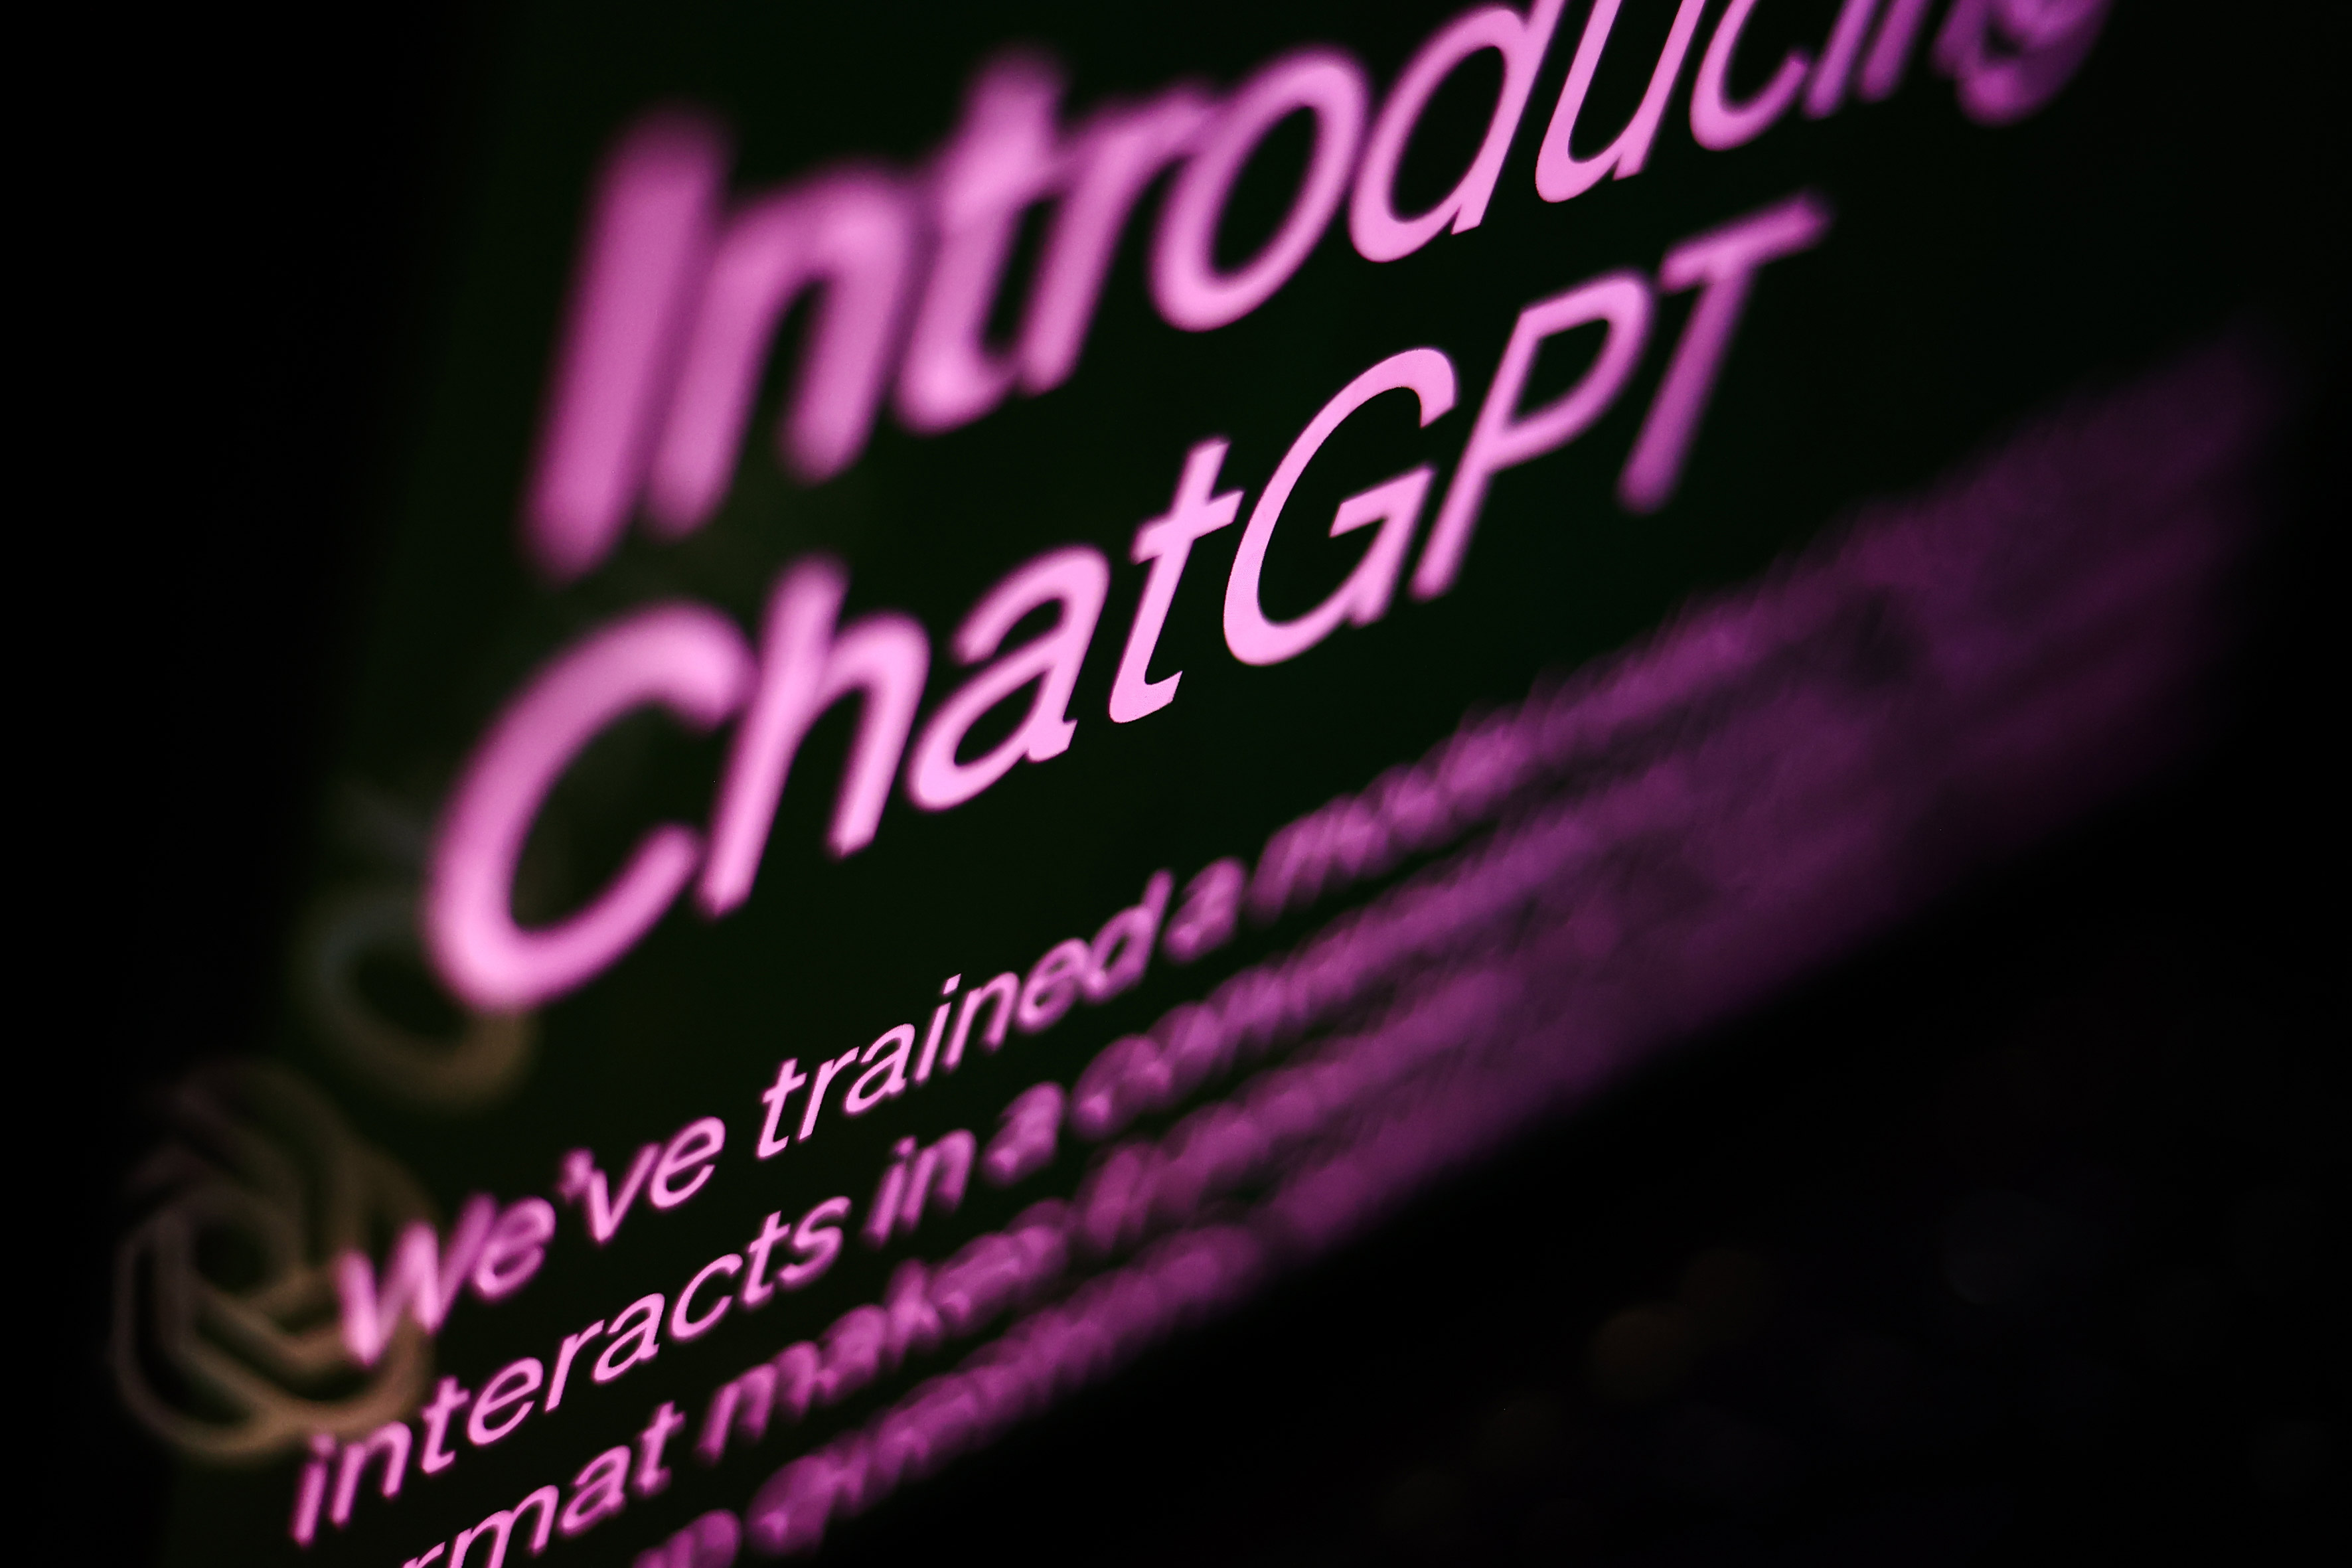 A photo of ChatGPT's website.